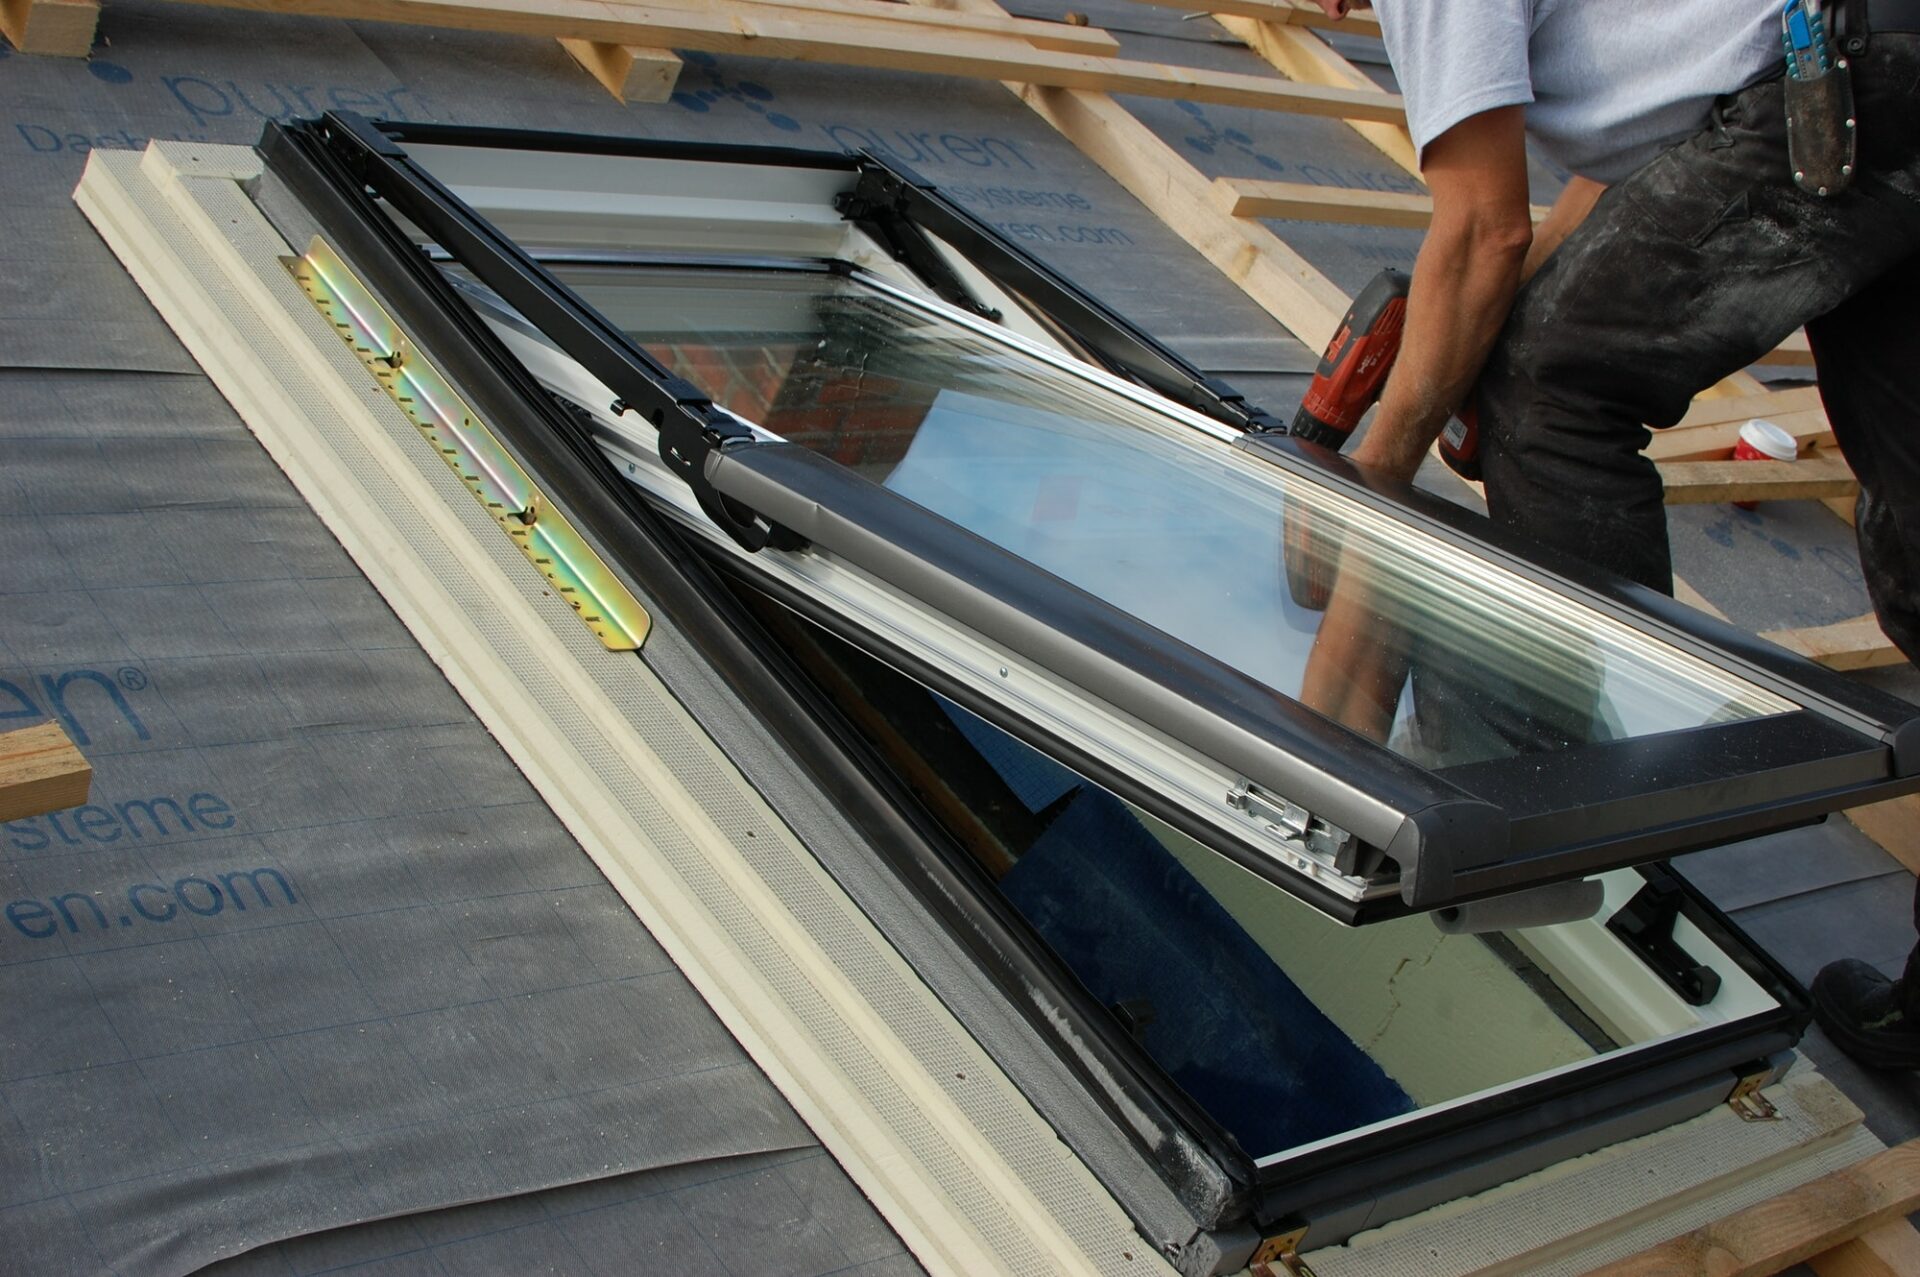 Assembling / fitting a roof window / skylight with reflection of worker in window glass